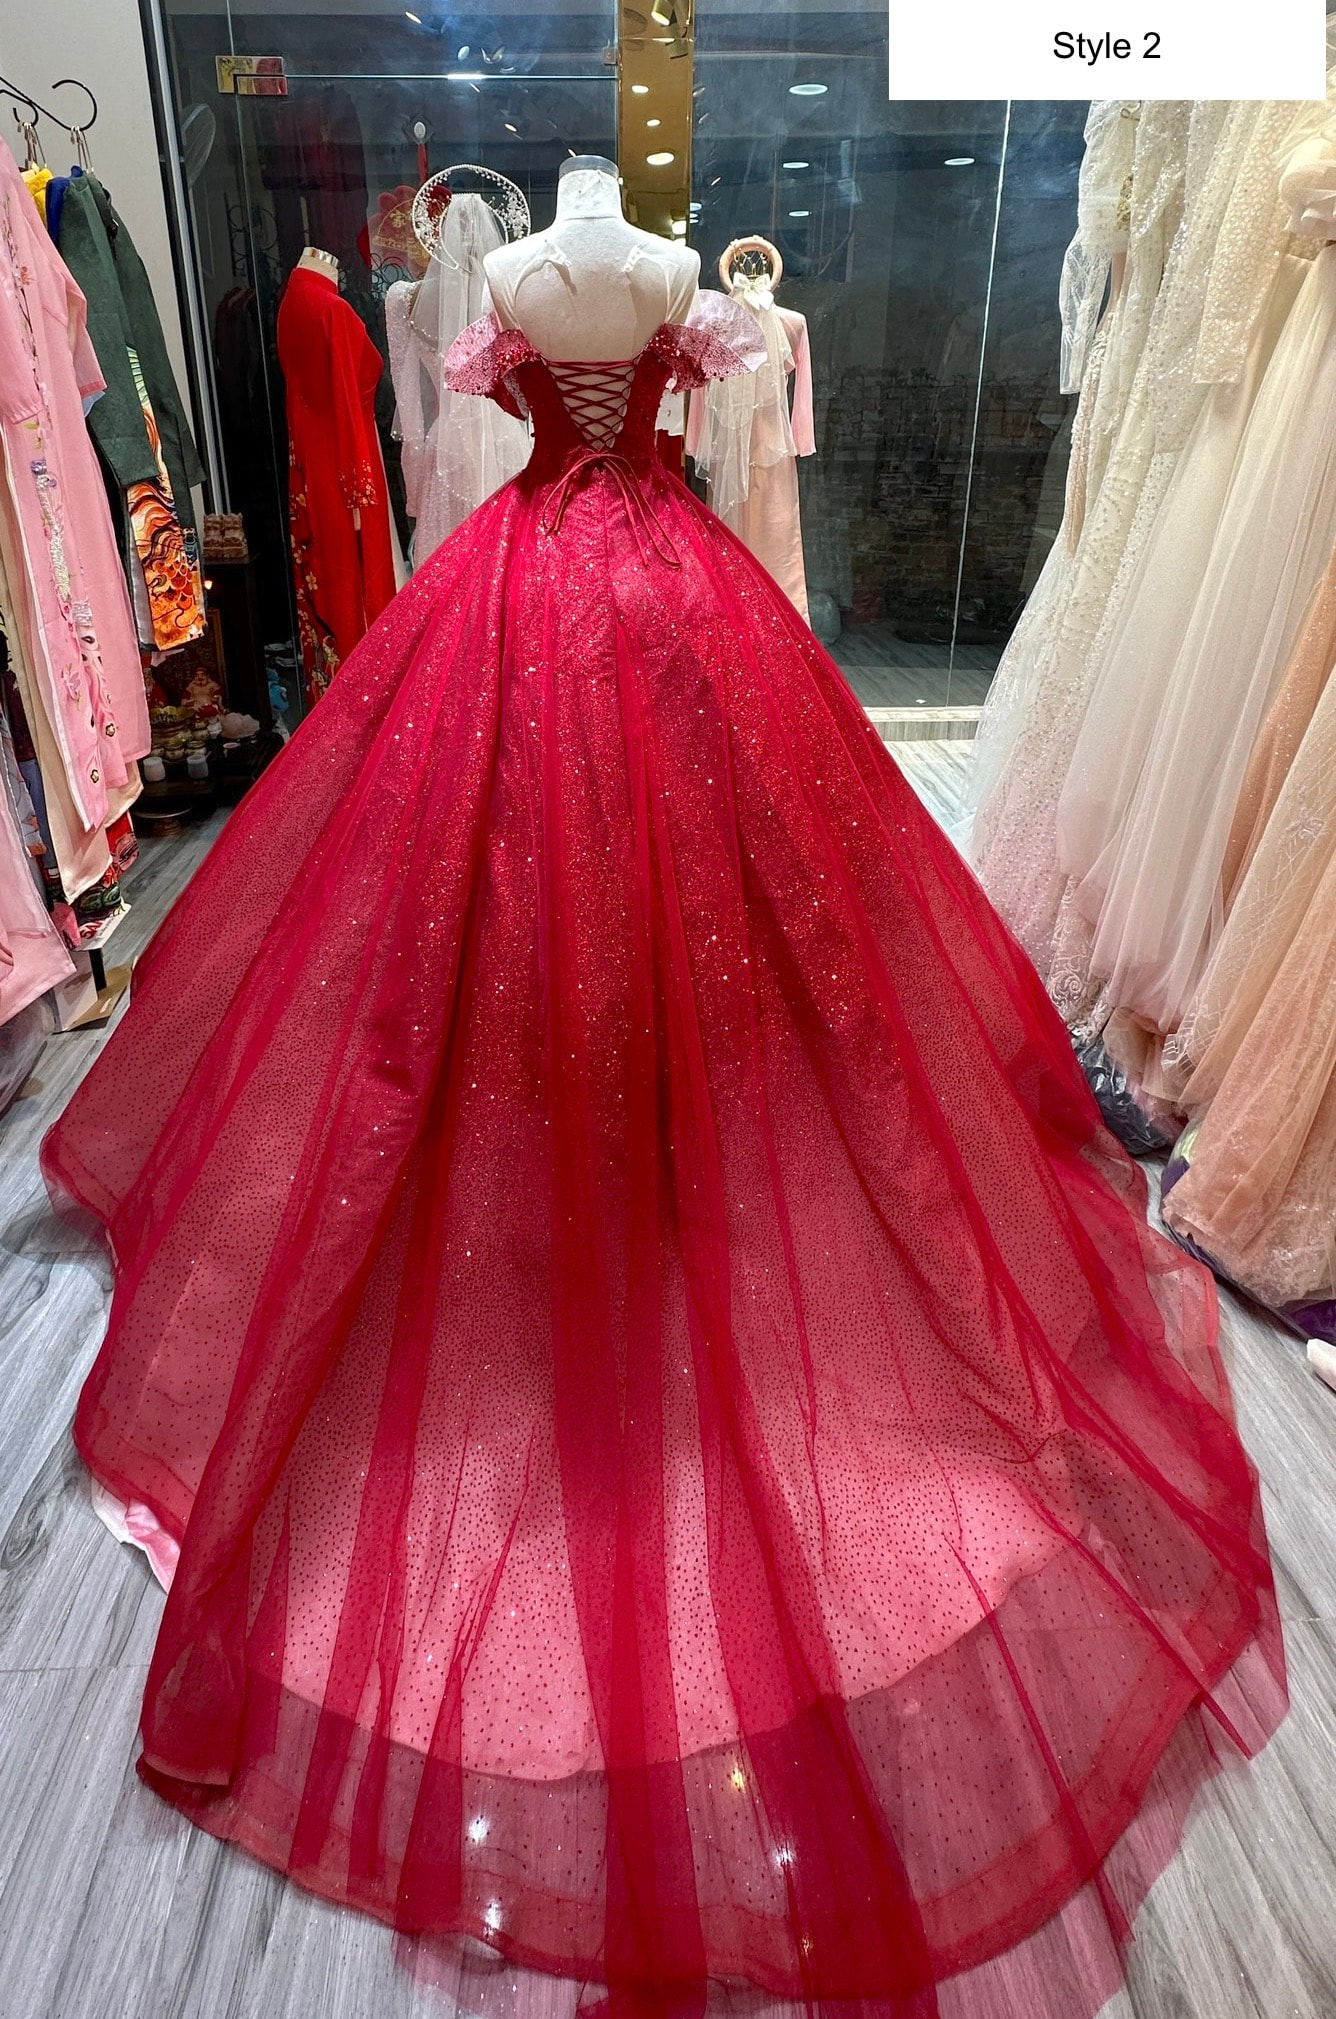 Ball Gown Off The Shoulder Red Tulle Wedding Dress | Red ball gowns, Red  wedding gowns, Gowns